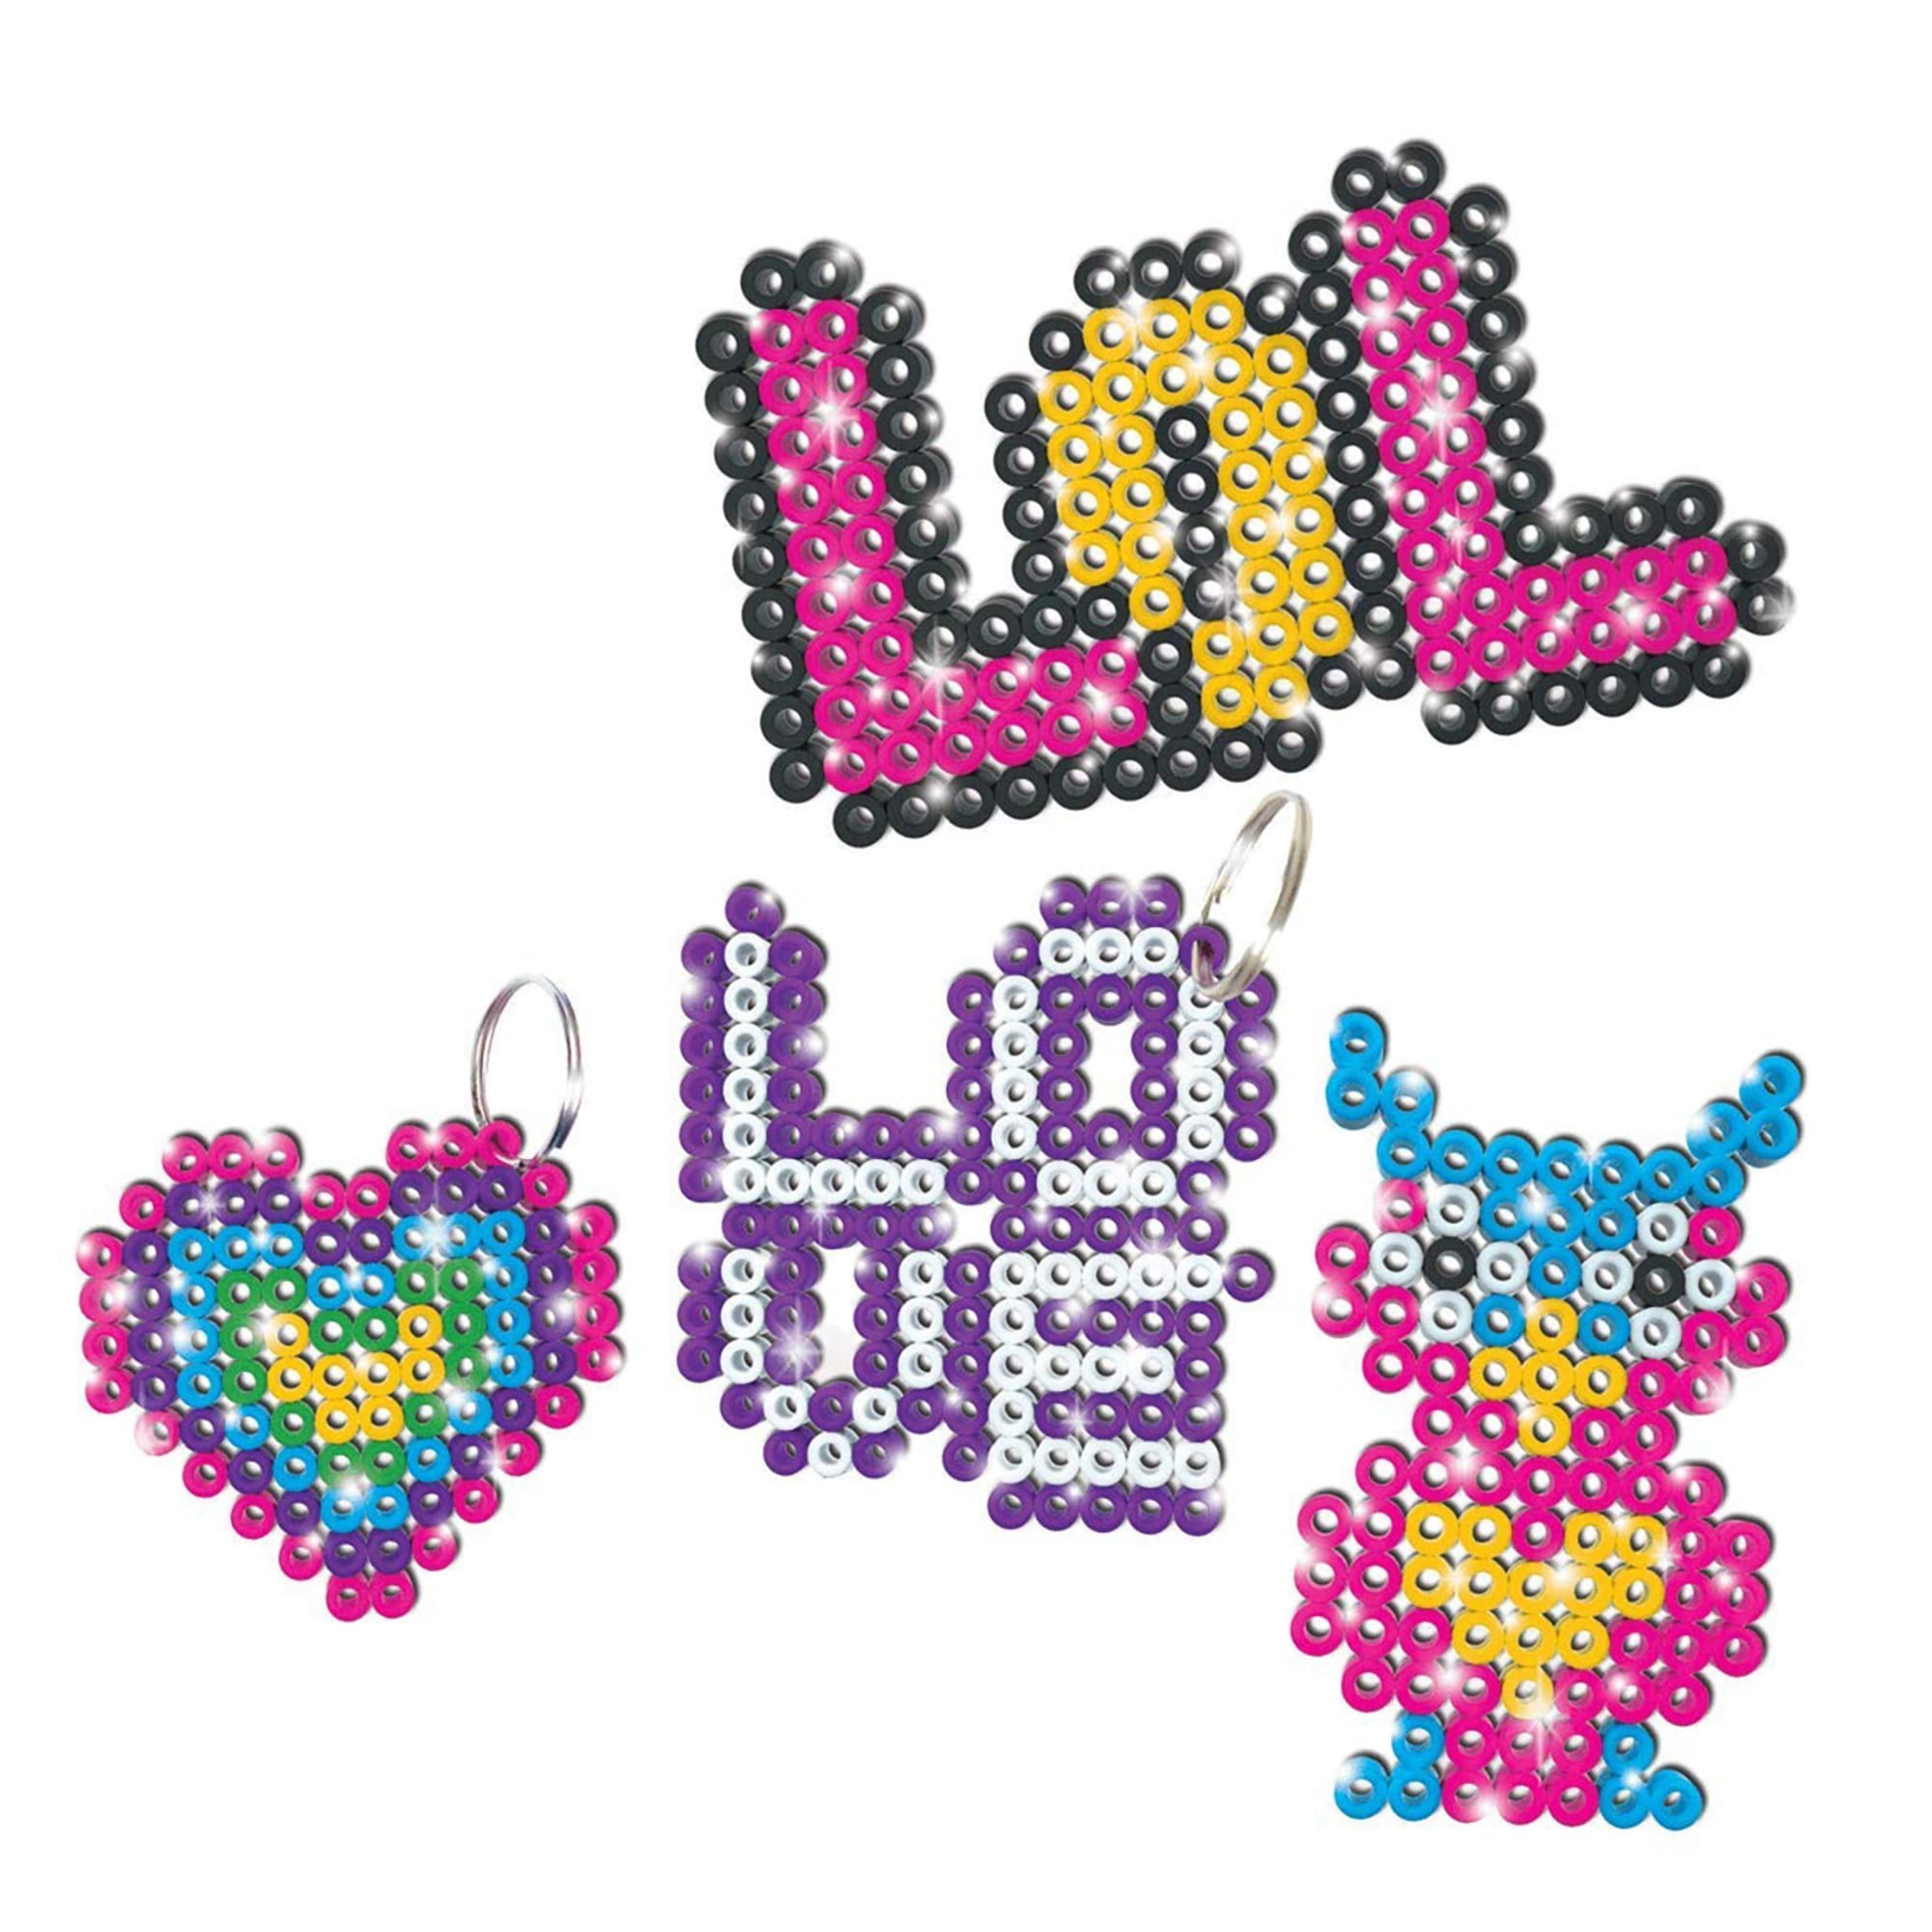 AMAV EZ Beads Charms-800 Beads Set, Craft Kit to Create Fun and Easy Bead Projects, Children Ages 5 and Up